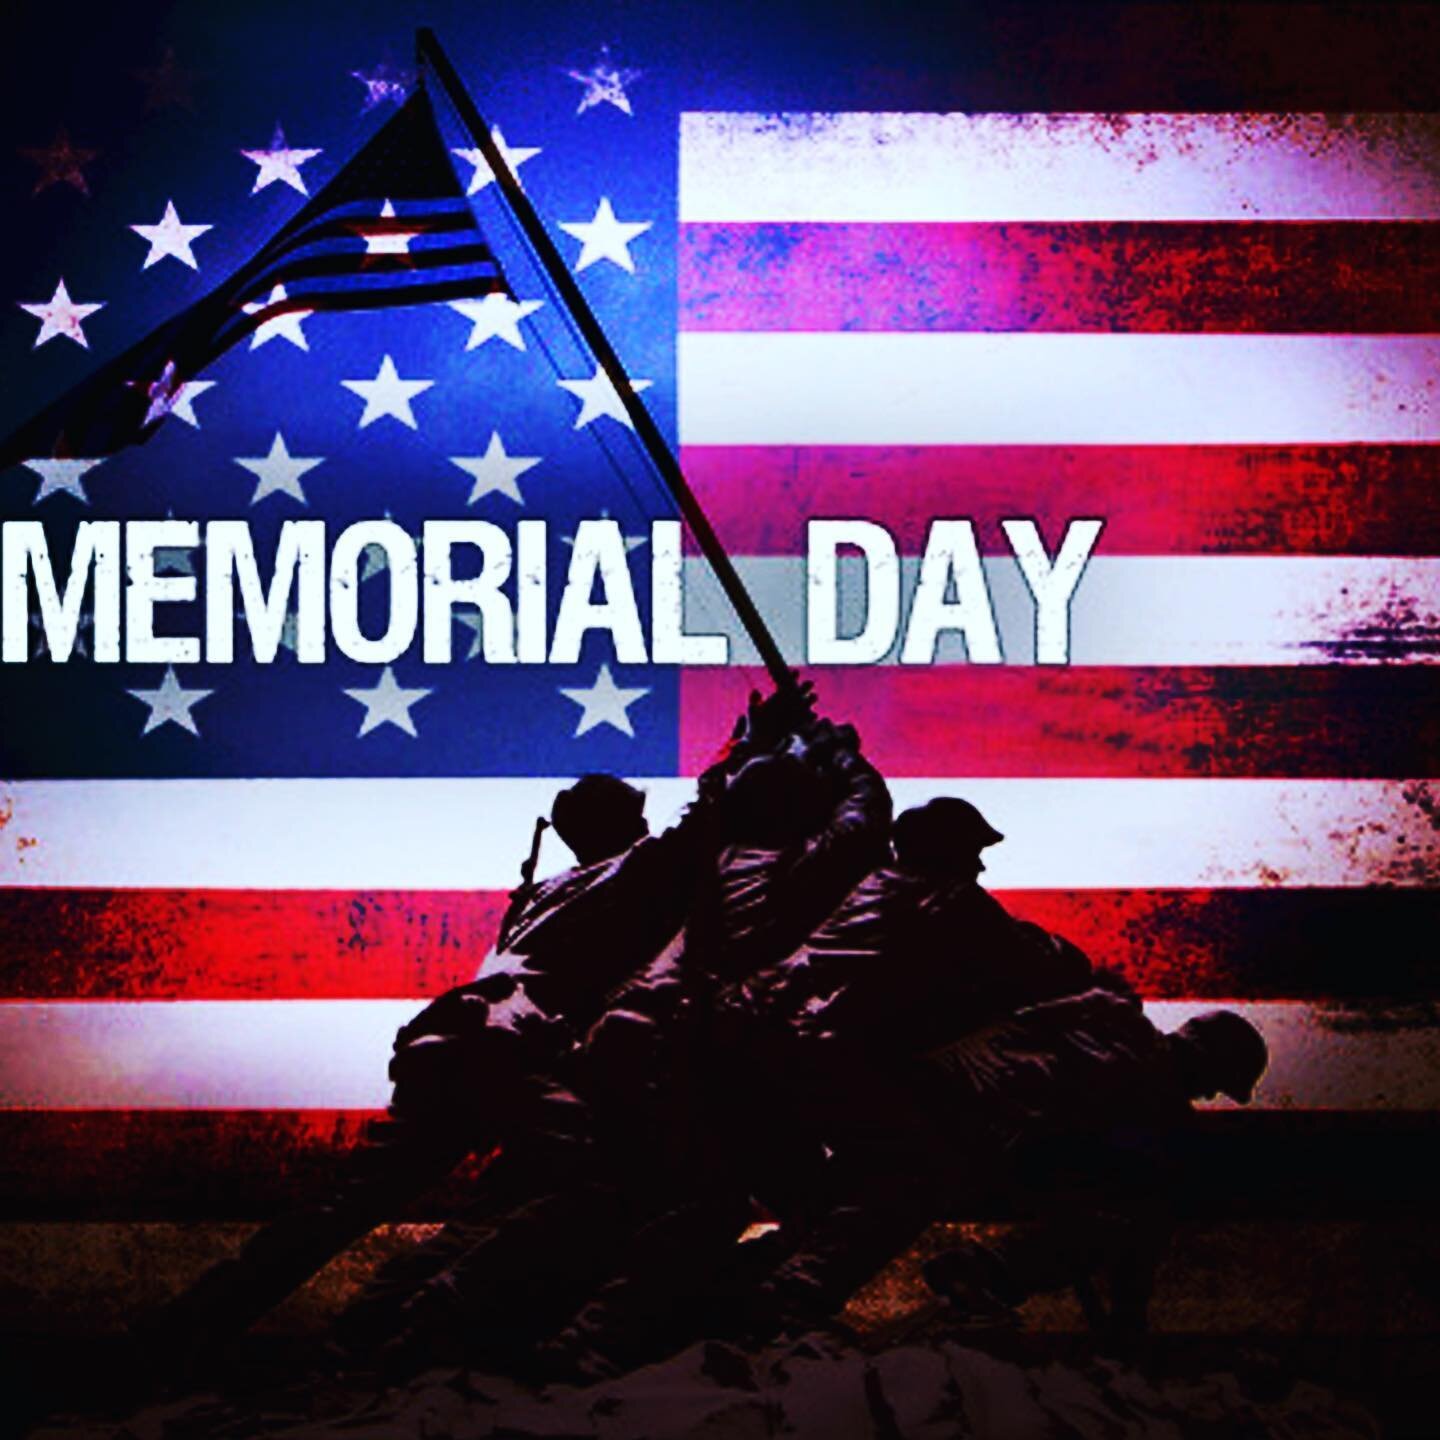 Happy Memorial Day to all of our friends and family in the 🇺🇸 #memorialday #usa #neverforget #calgaryresidential #calgaryelectrical #calgarywiring  #calgaryhomes #calgarybuilders #calgarybuzz  #calgaryalberta #calgarylife #calgaryliving #stronghold